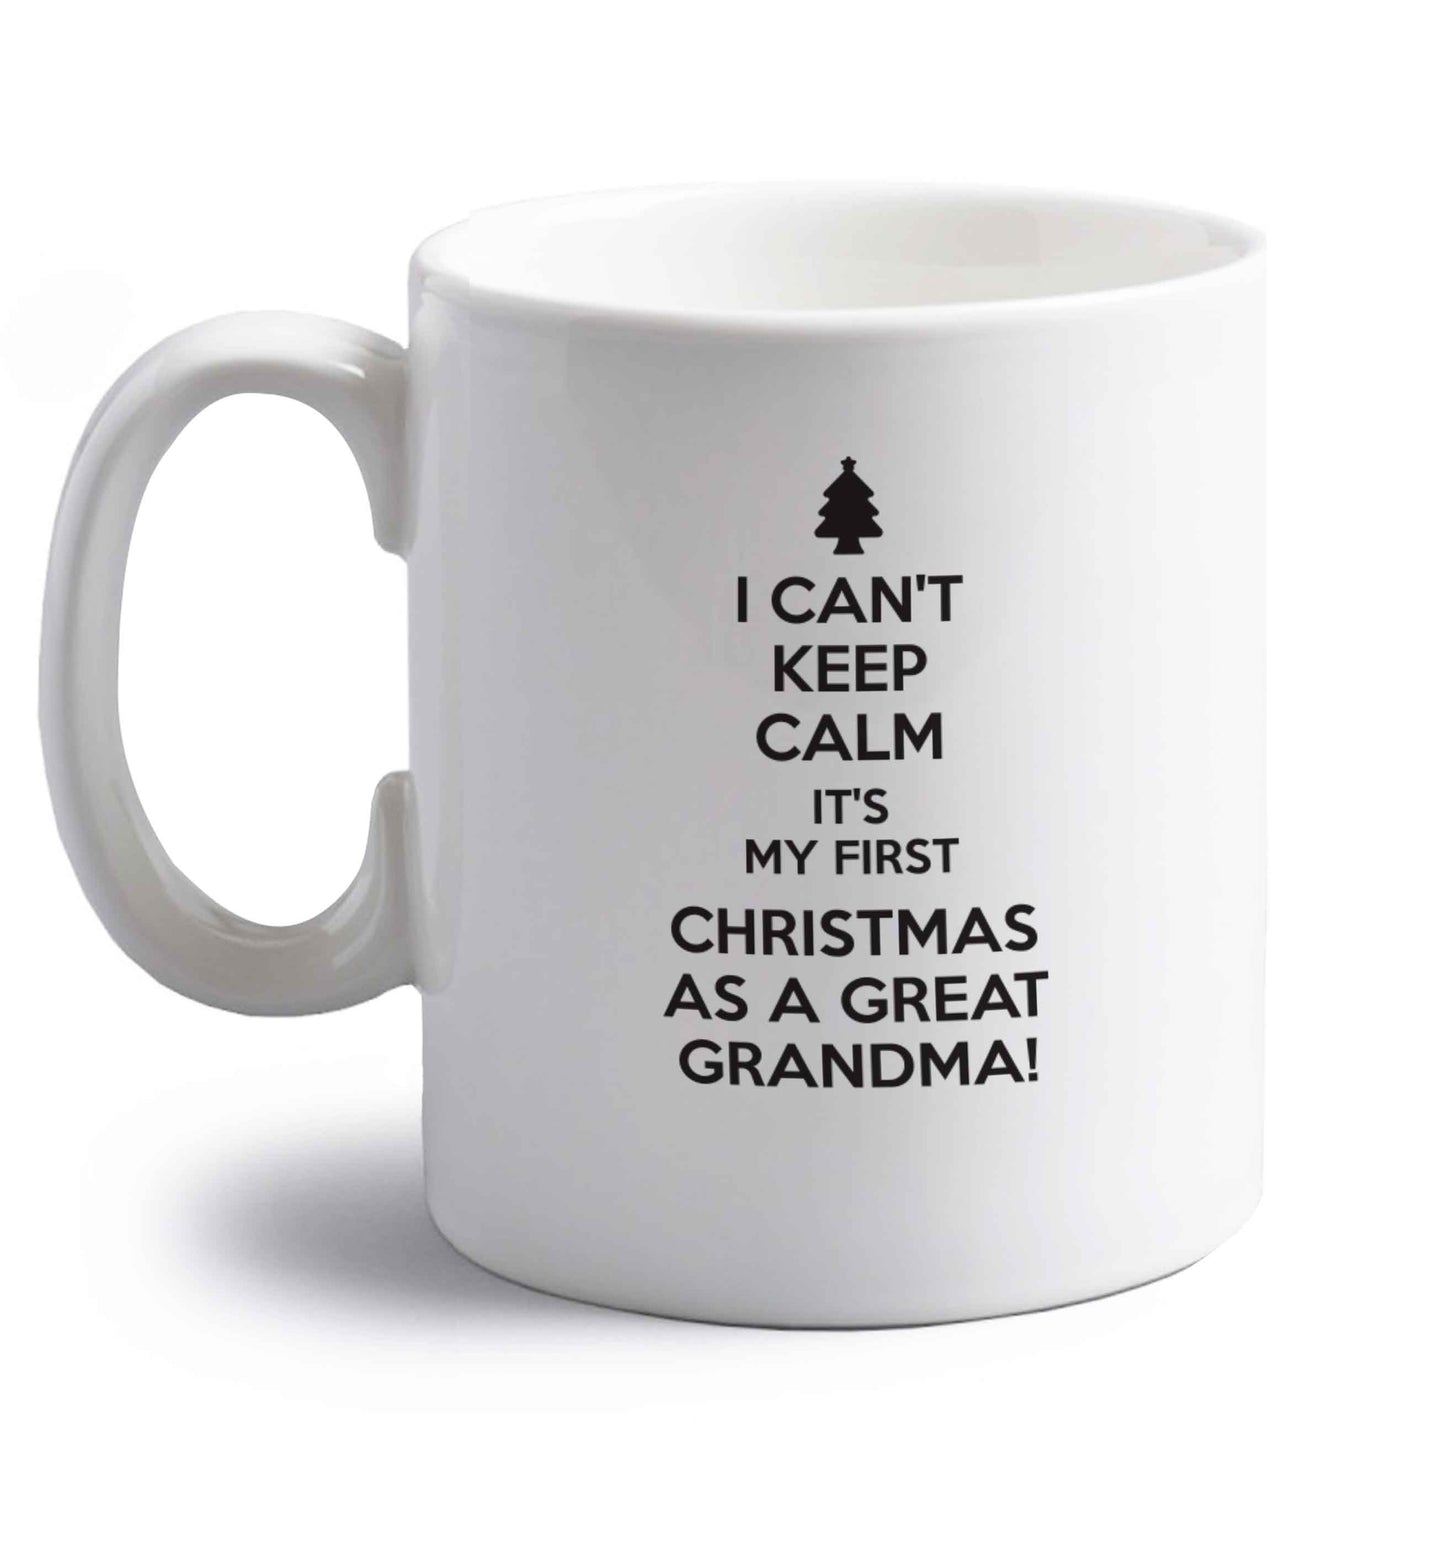 I can't keep calm it's my first Christmas as a great grandma! right handed white ceramic mug 